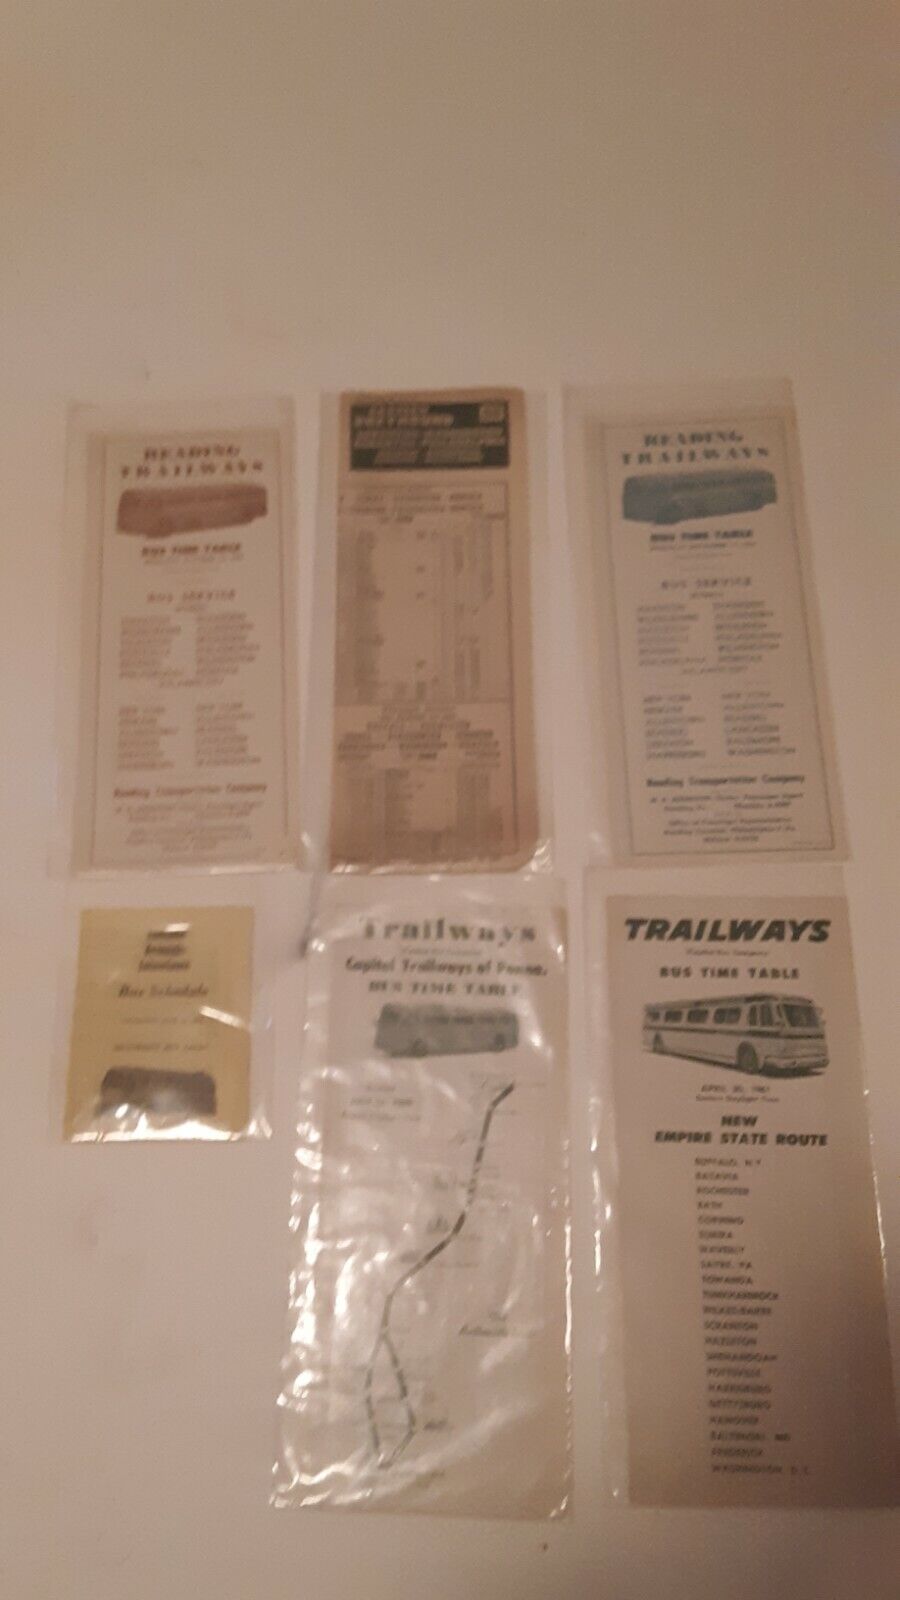 Lot of 6 Vintage Greyhound/Trailways, Bus Tables/Schedules, PA and East Coast